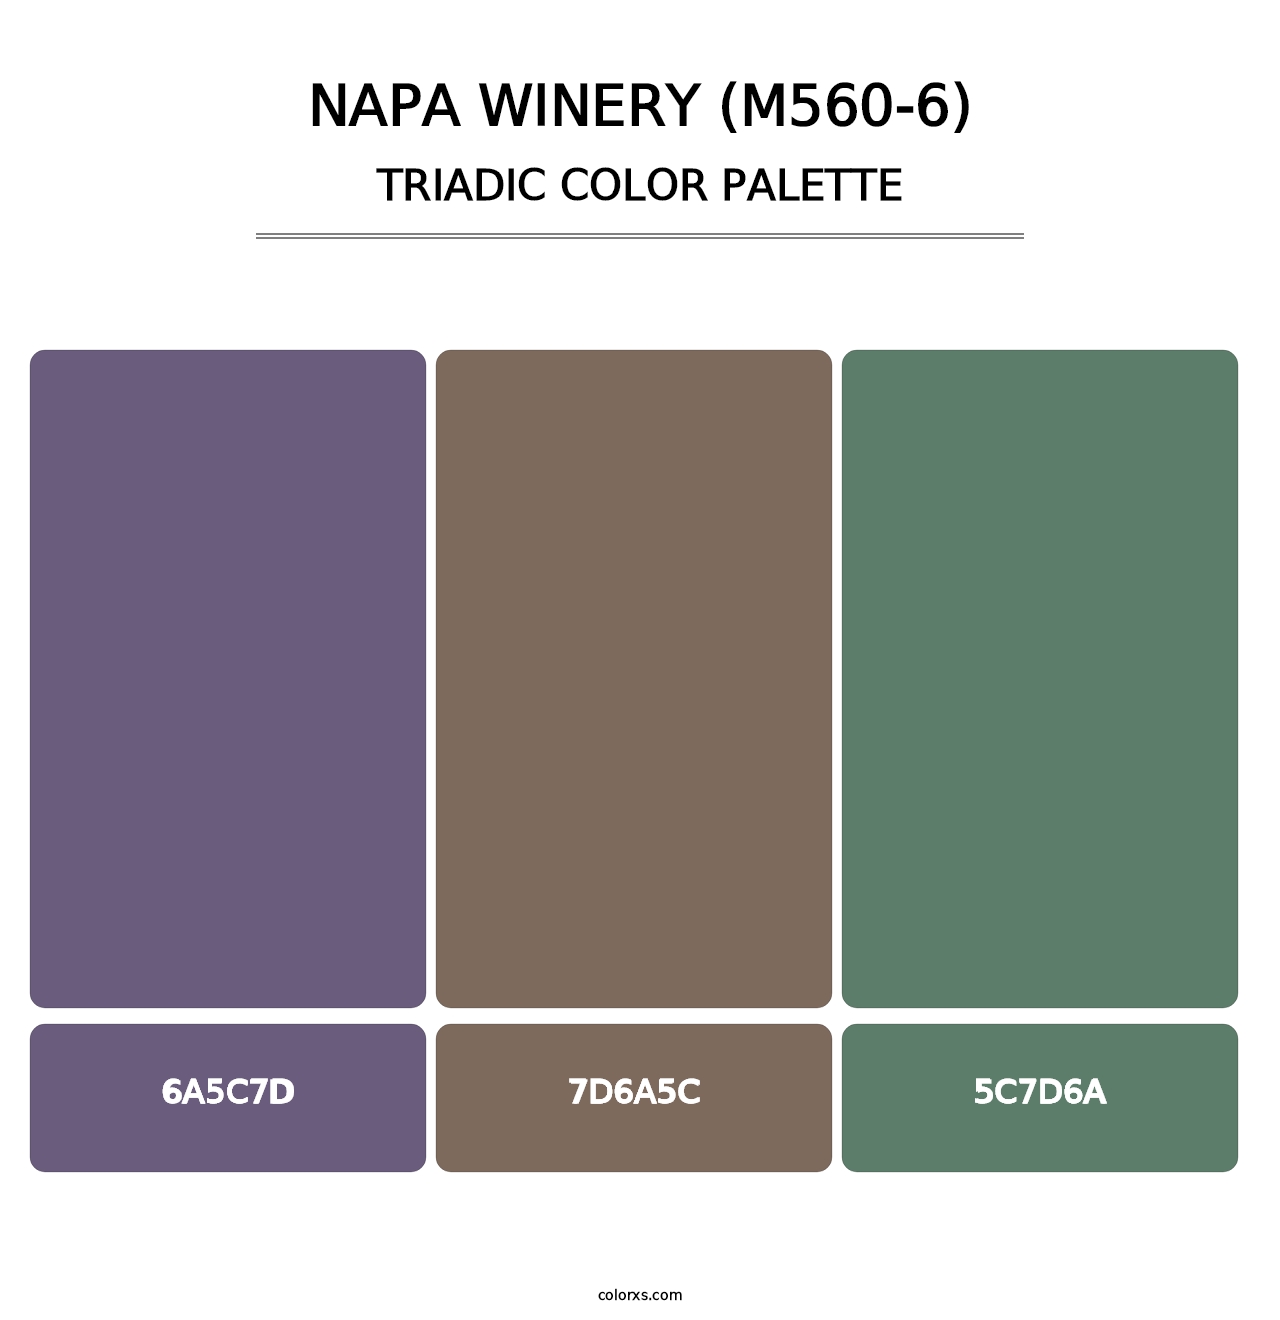 Napa Winery (M560-6) - Triadic Color Palette